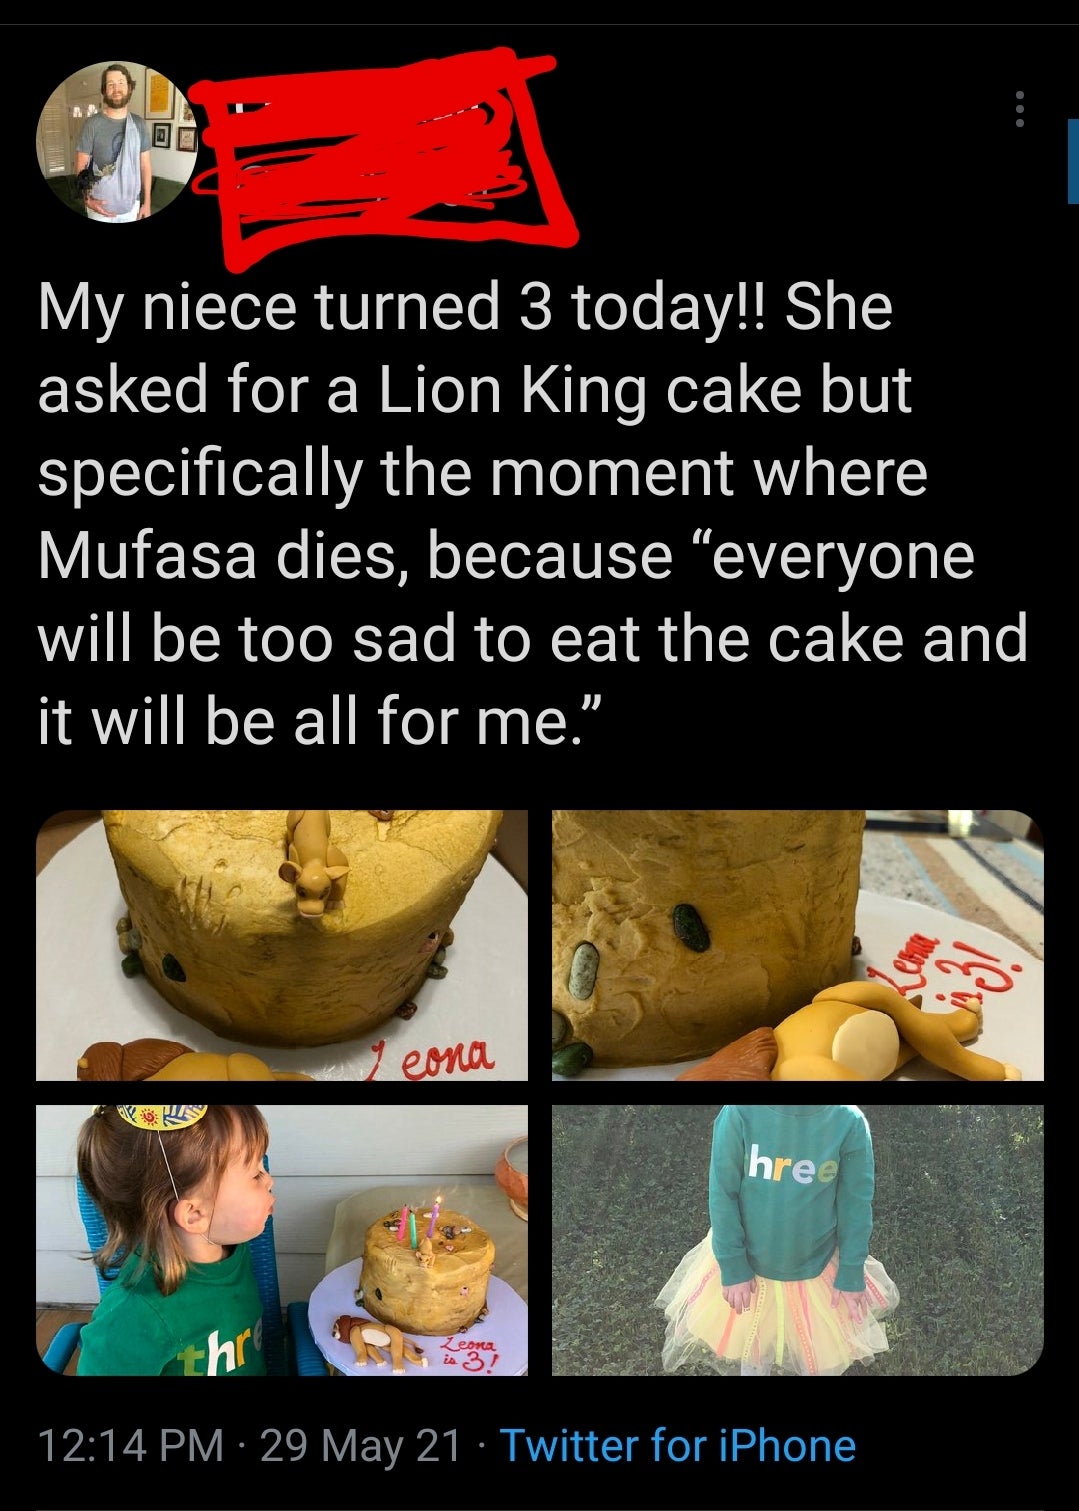 screenshot - My niece turned 3 today!! She asked for a Lion King cake but specifically the moment where Mufasa dies, because "everyone will be too sad to eat the cake and it will be all for me. ier emca hree thro Zeona is 3! 29 May 21 Twitter for iPhone